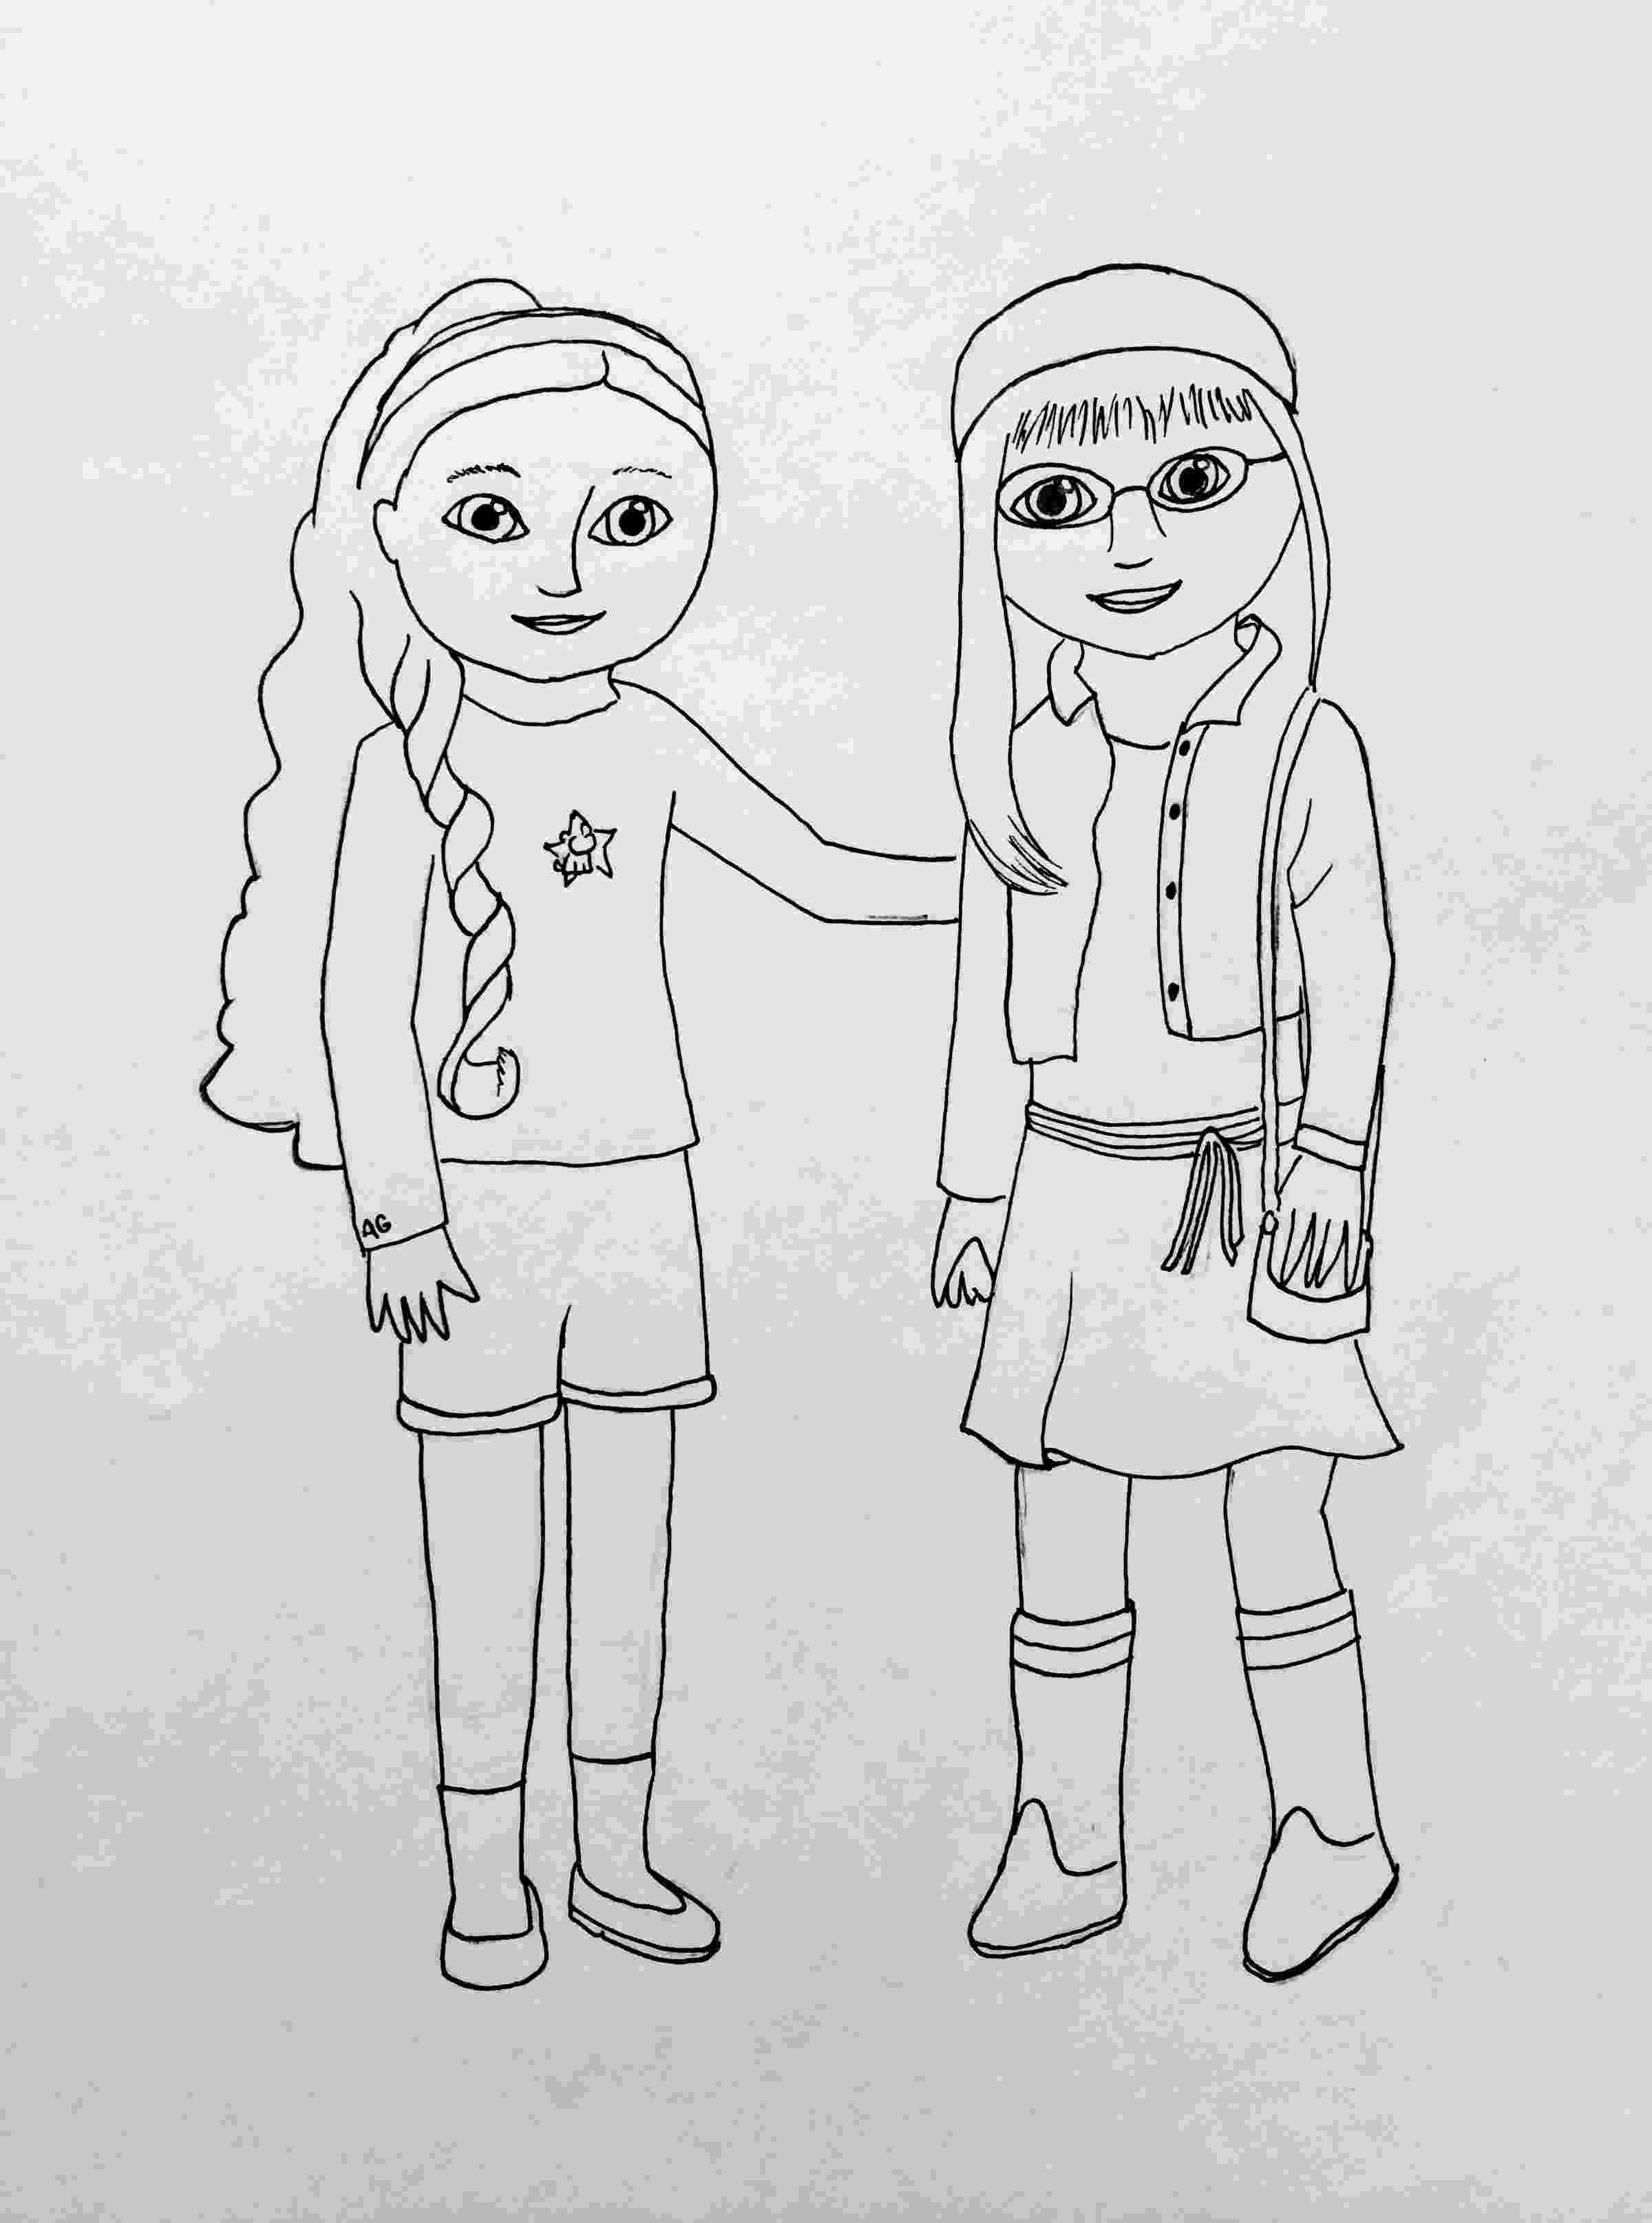 american girl coloring pages free american girl isabelle doll coloring page free printable pages american girl coloring free 